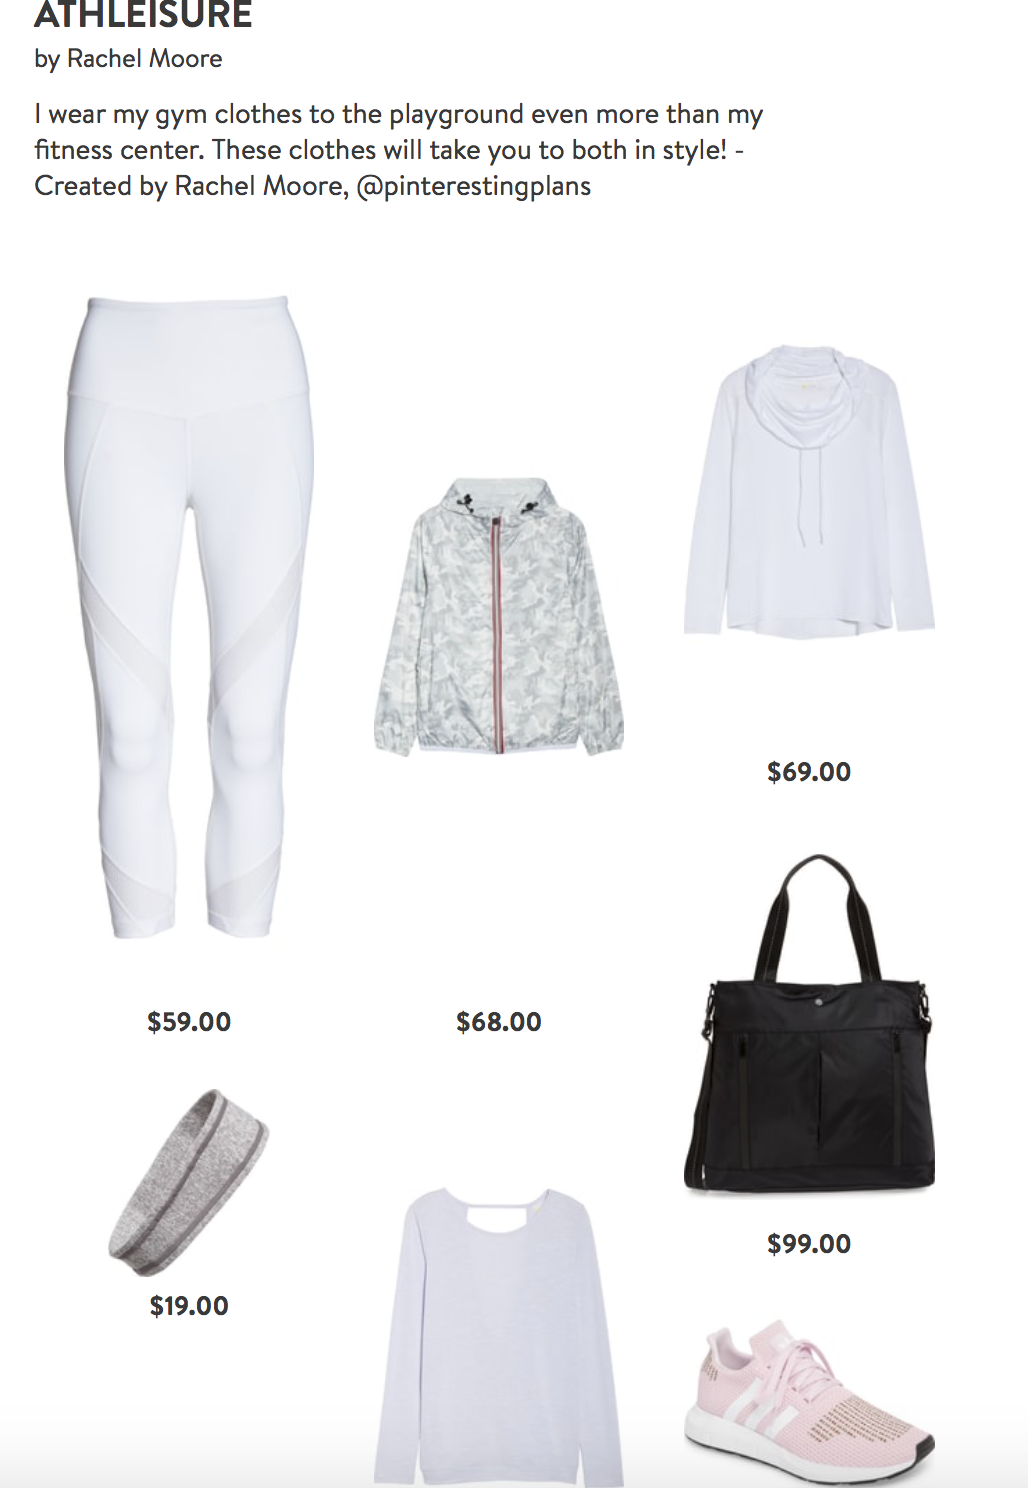 Nordstrom Anniversary Sale 2018 - Athleisure Outfit Ideas with white workout leggings